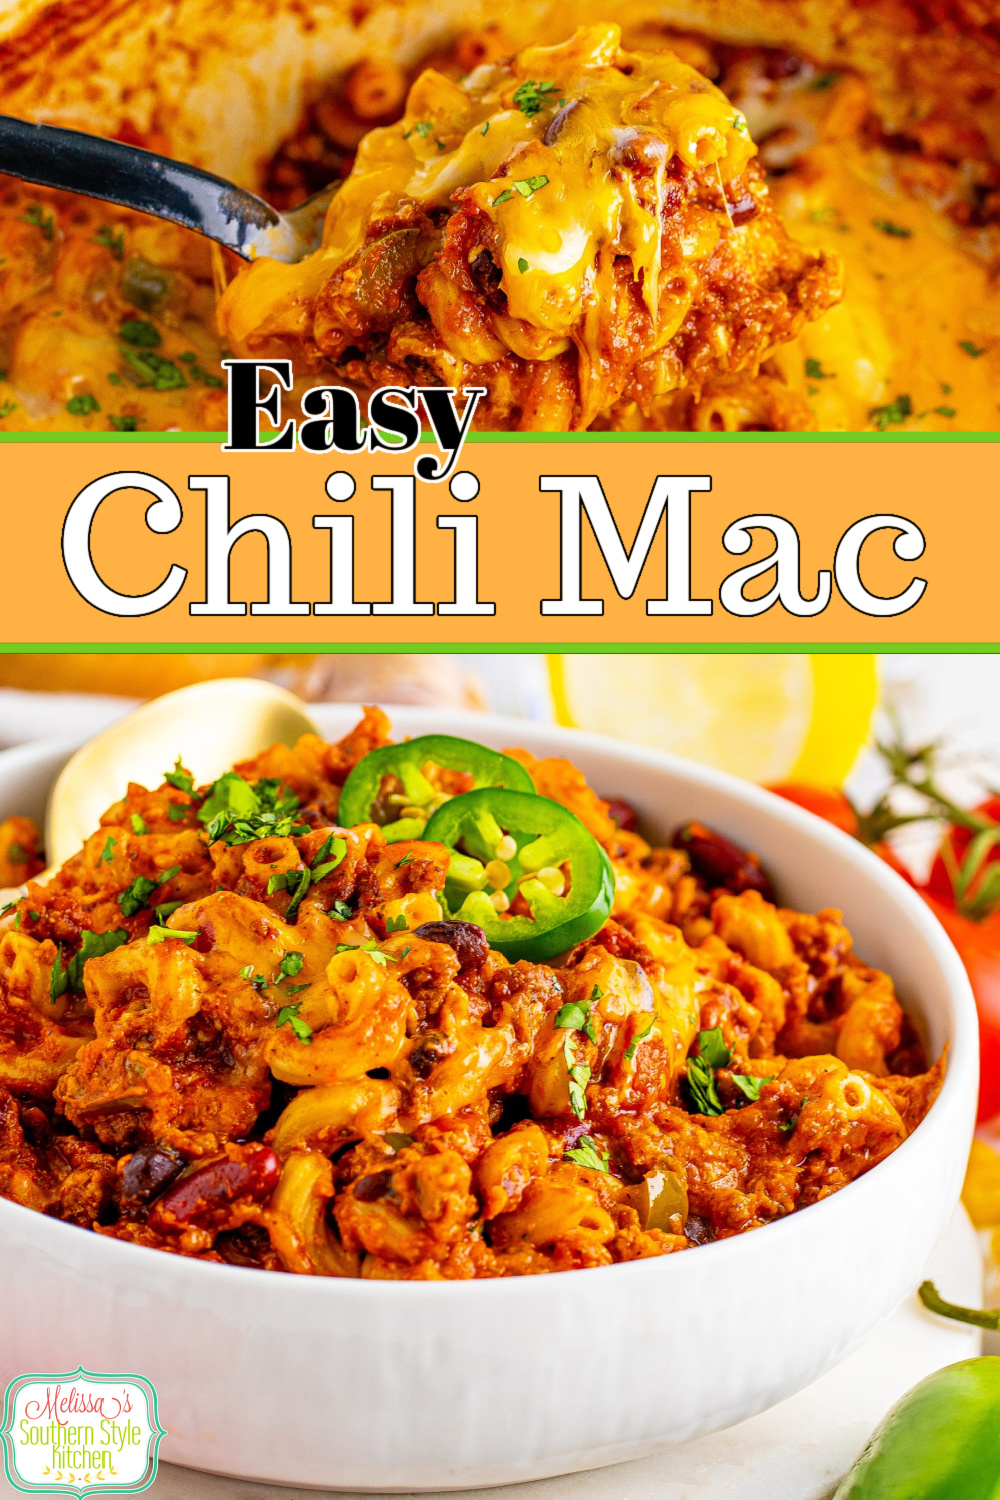 This easy Chili Mac Recipe is a one pot meal that's made entirely on the stovetop #chiliwithbeans #chilimac #chilimacaroni #easygroundbeefrecipes #chili #macaronirecipes #groundbeef #easychilimac #stovetopchilimac via @melissasssk